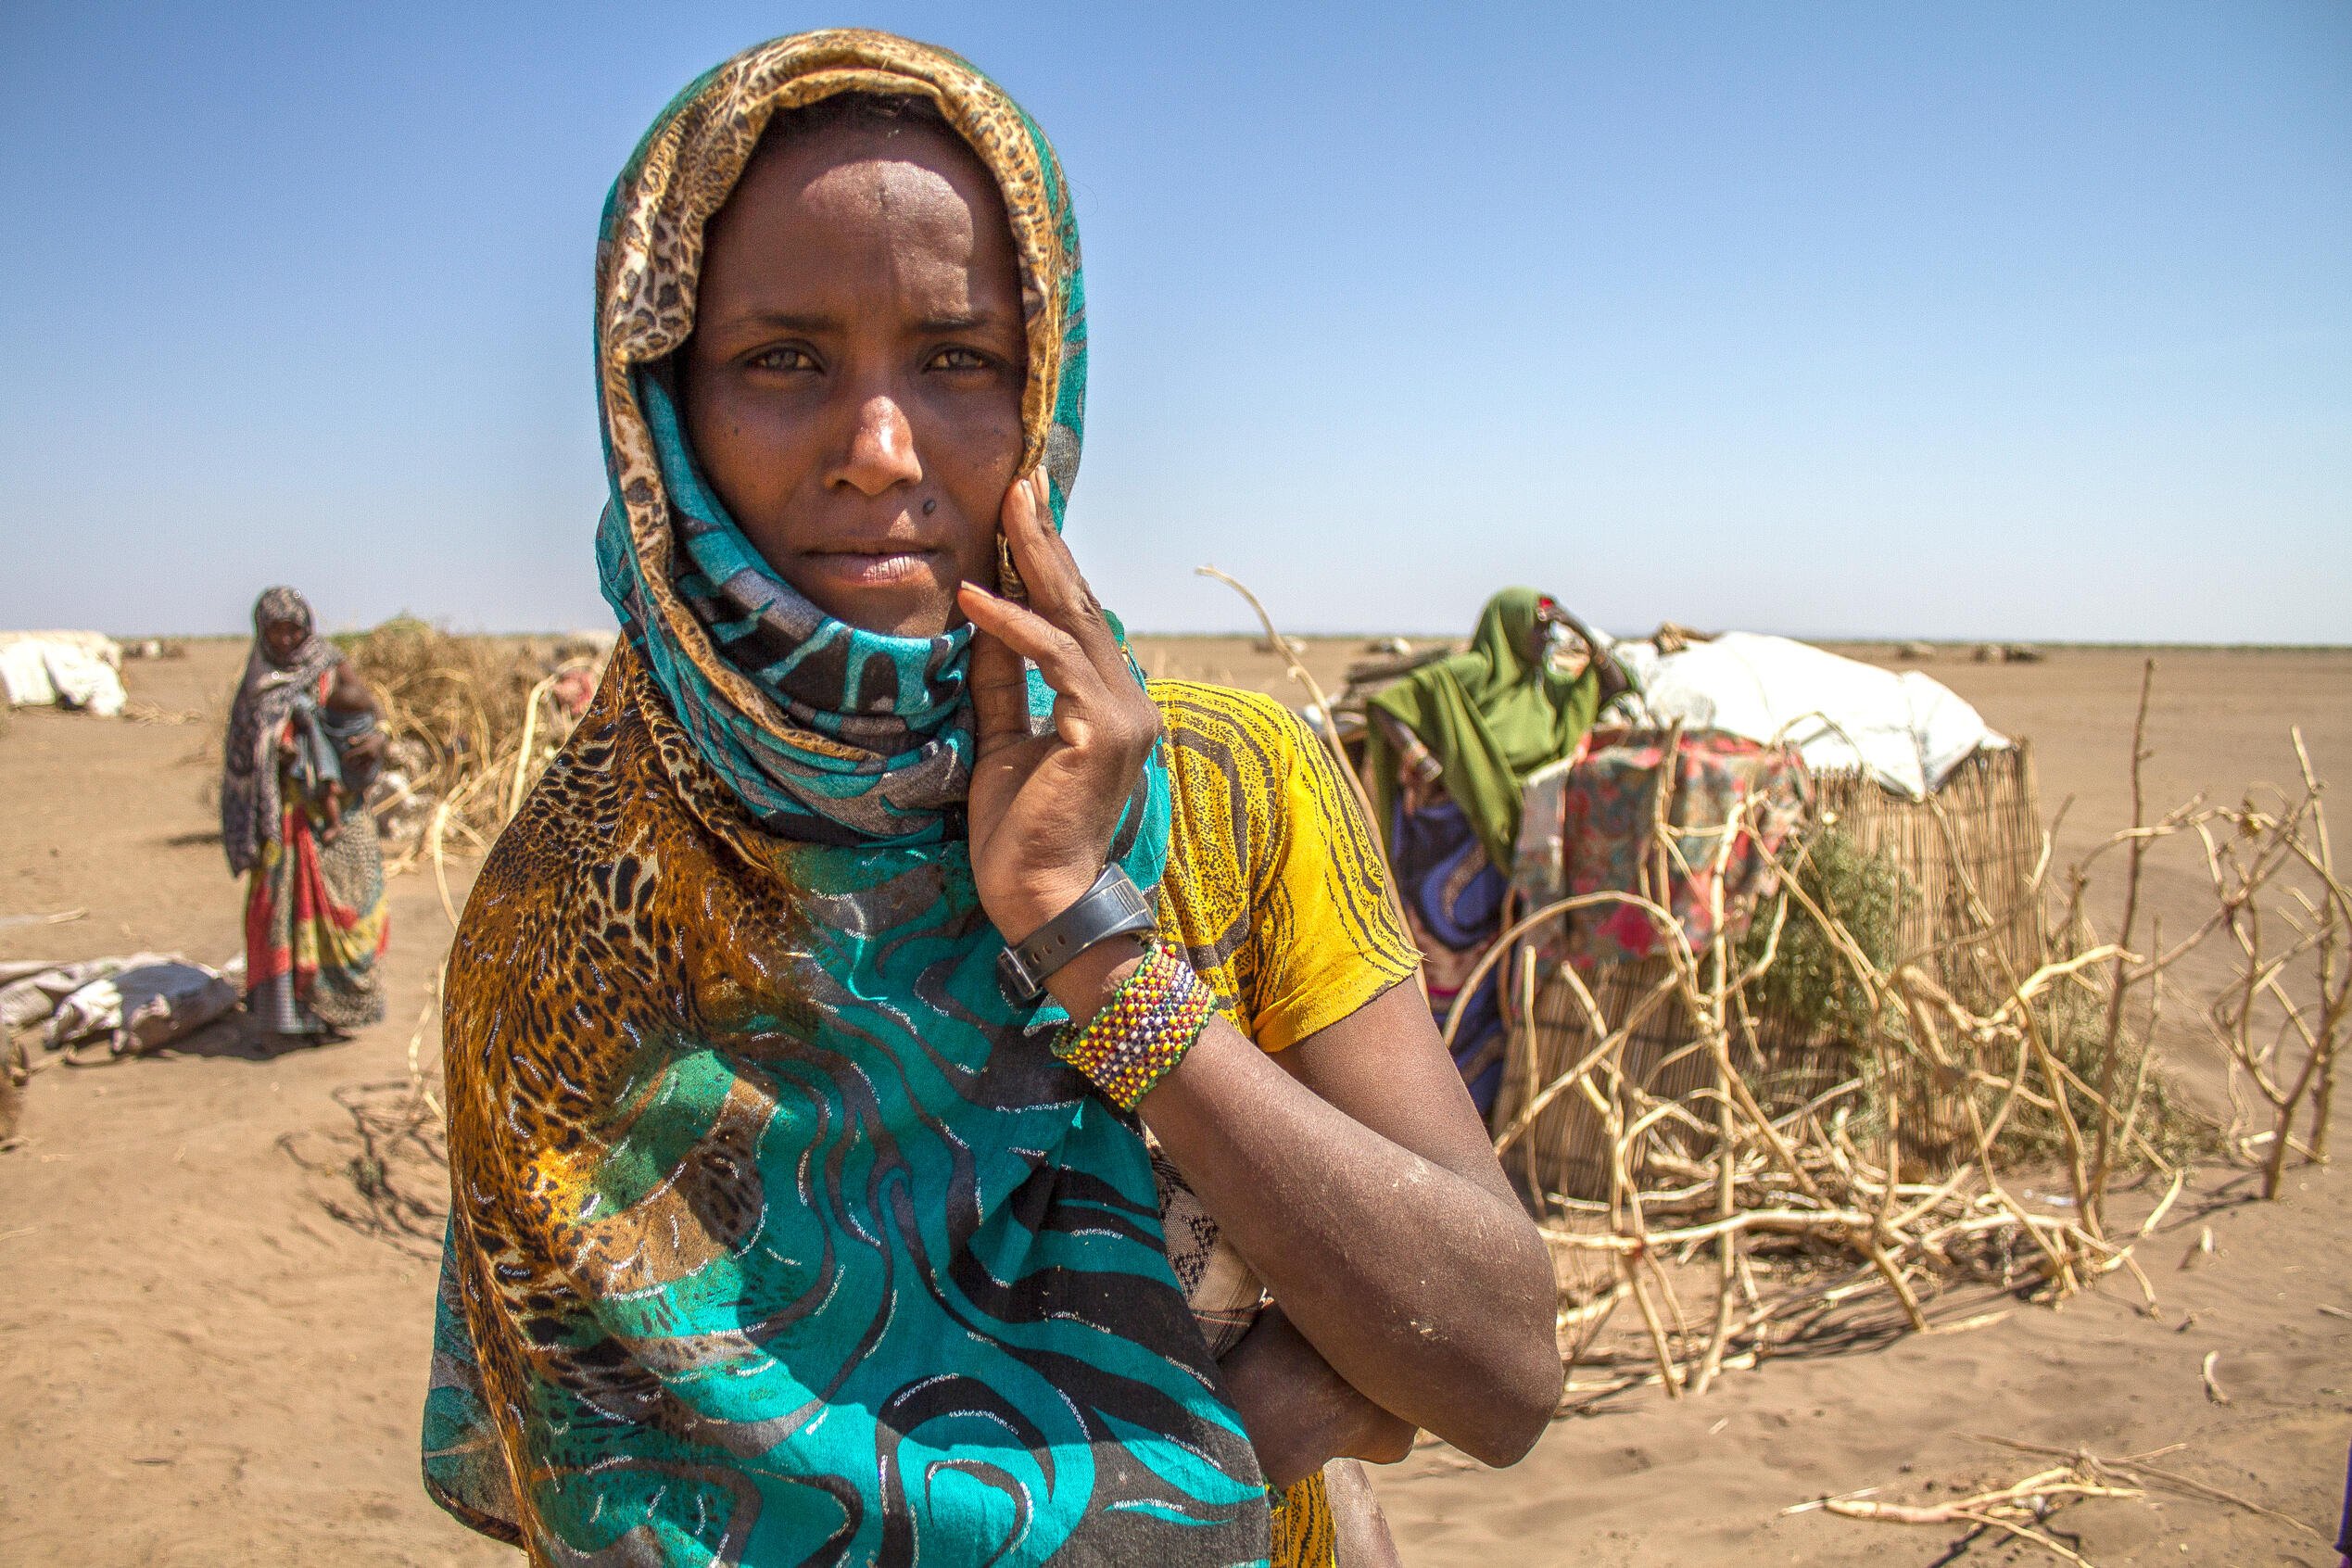 Deqa Omer, 32, stands among makeshift tents in a parched landscape in Ethiopia during a drought, her fingers resting on her cheek as she looks at the camera.